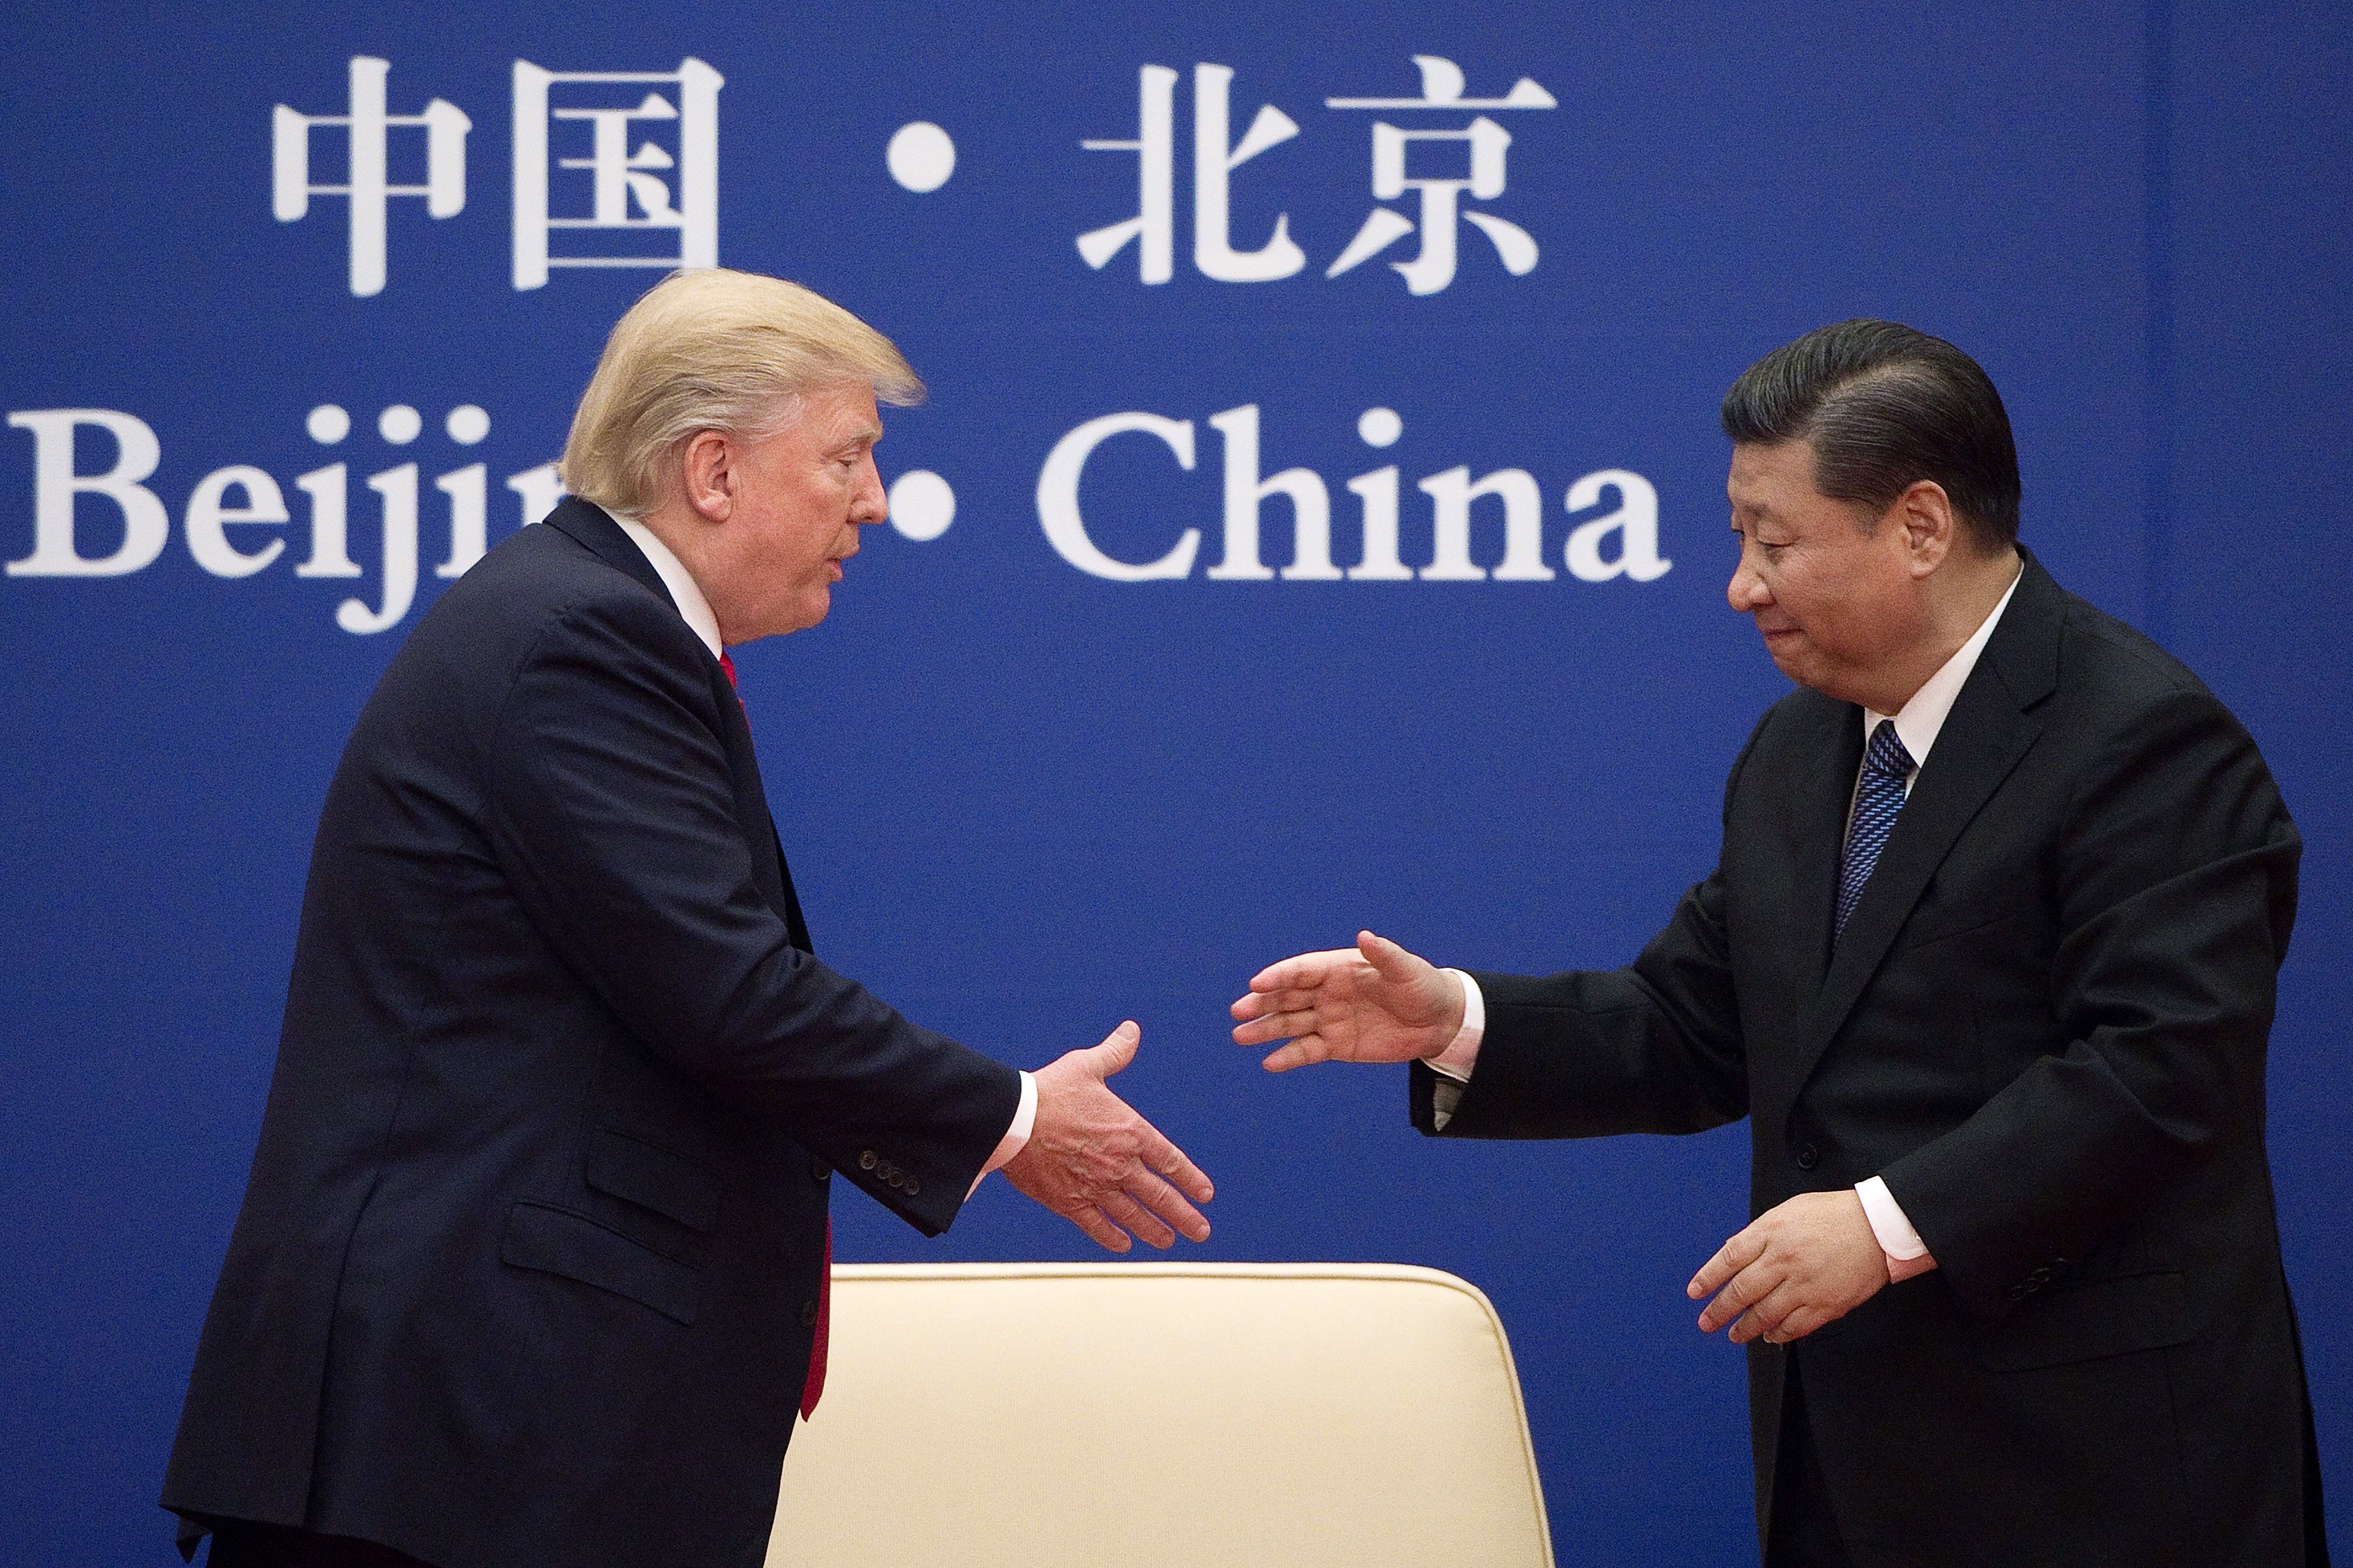 China's President Xi Jinping shakes hands with U.S. President Donald Trump during a business leaders event at the Great Hall of the People in Beijing on November 9, 2017. (Nicolas Asfouri—AFP/Getty Images)